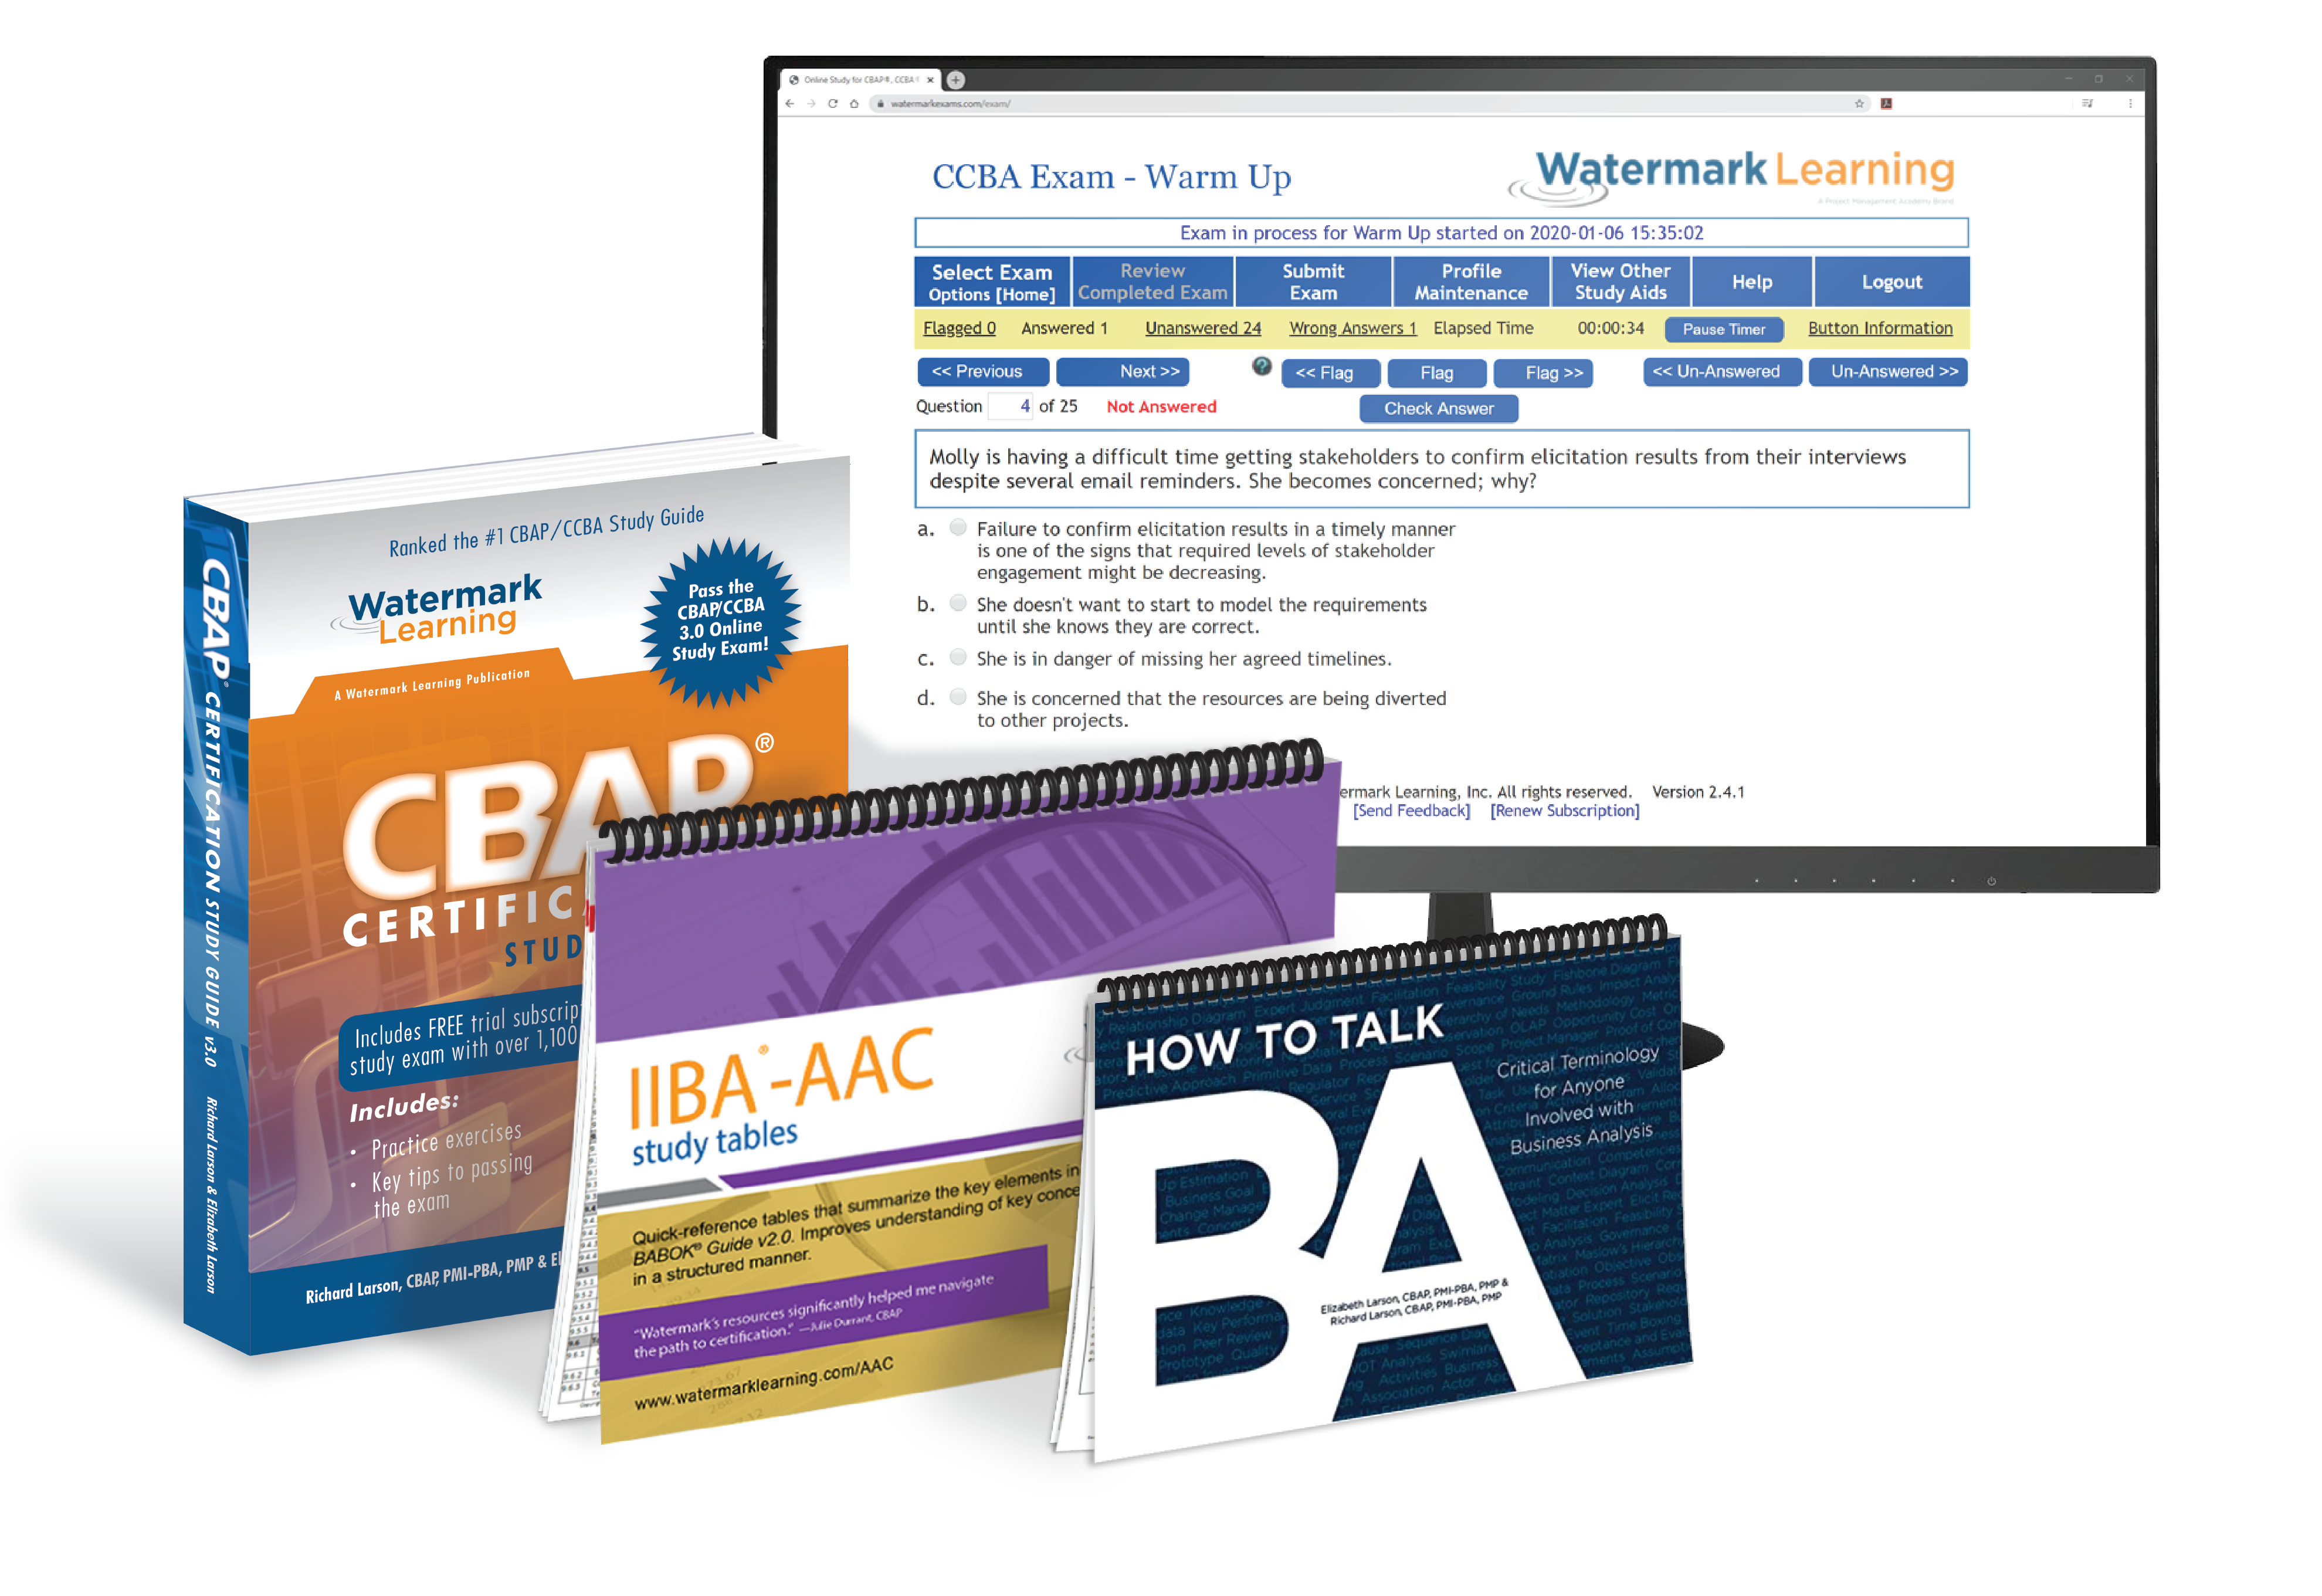 Watermark Course Materials